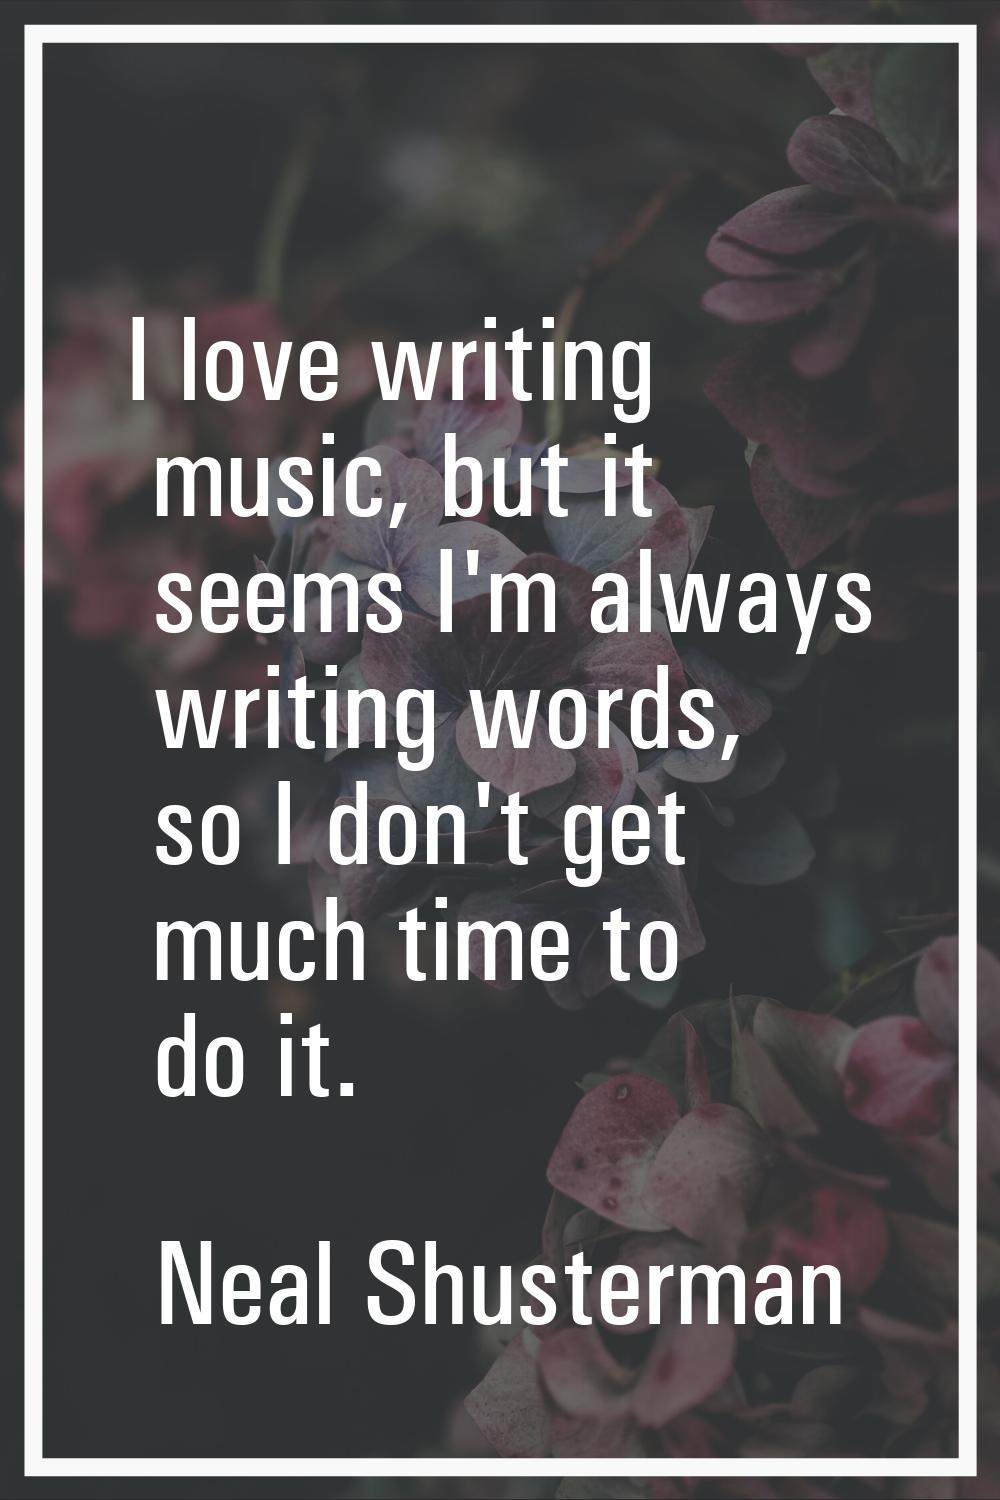 I love writing music, but it seems I'm always writing words, so I don't get much time to do it.